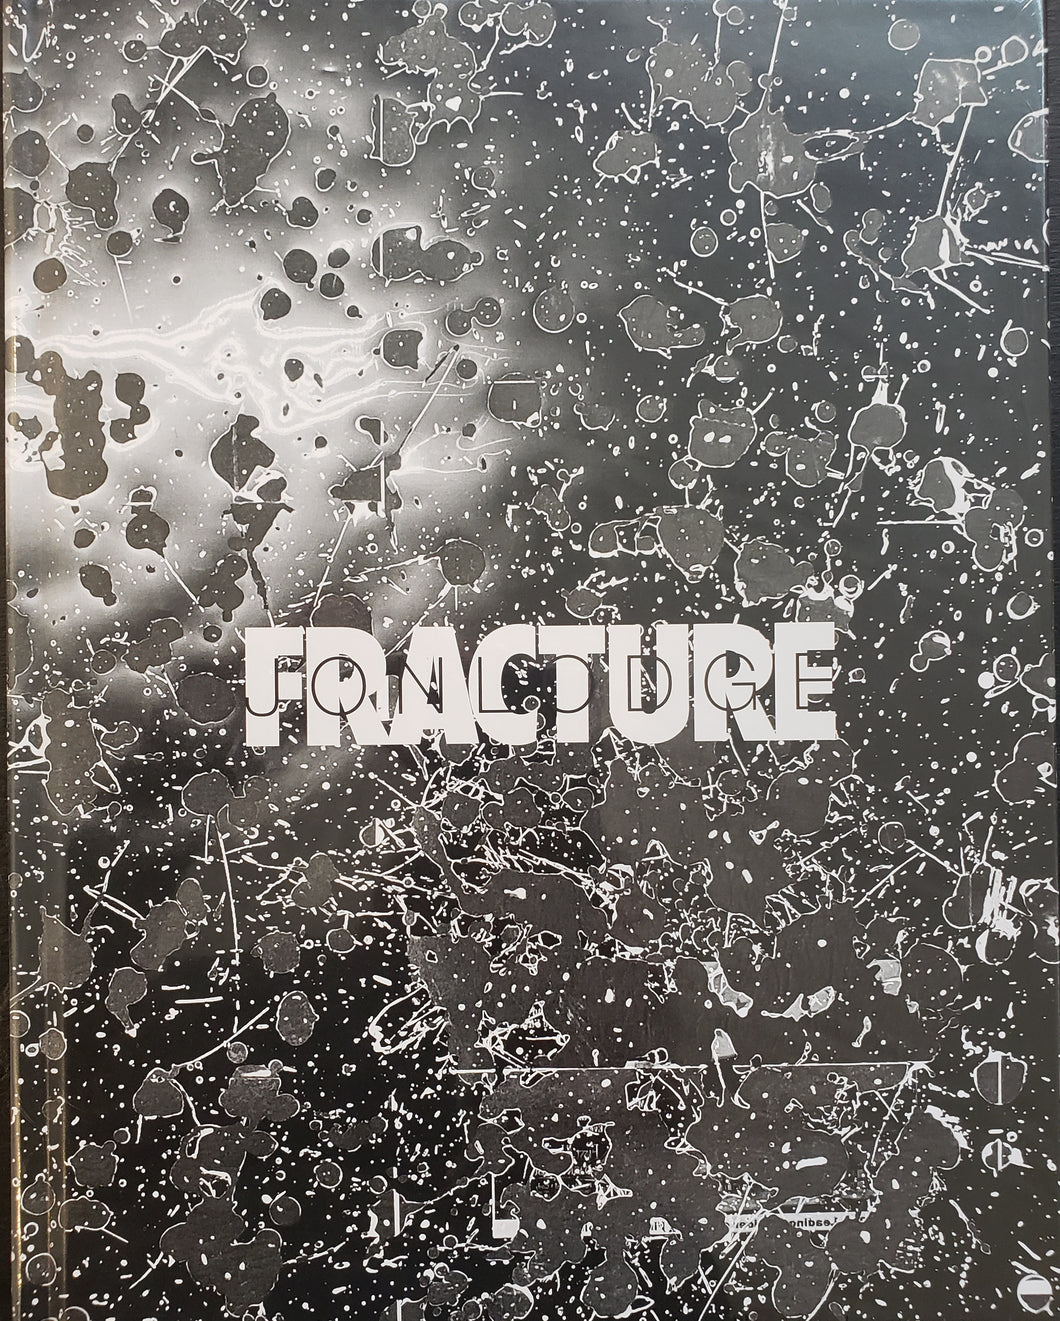 Jon Lodge Fracture Catalog | From MAM Exhibition